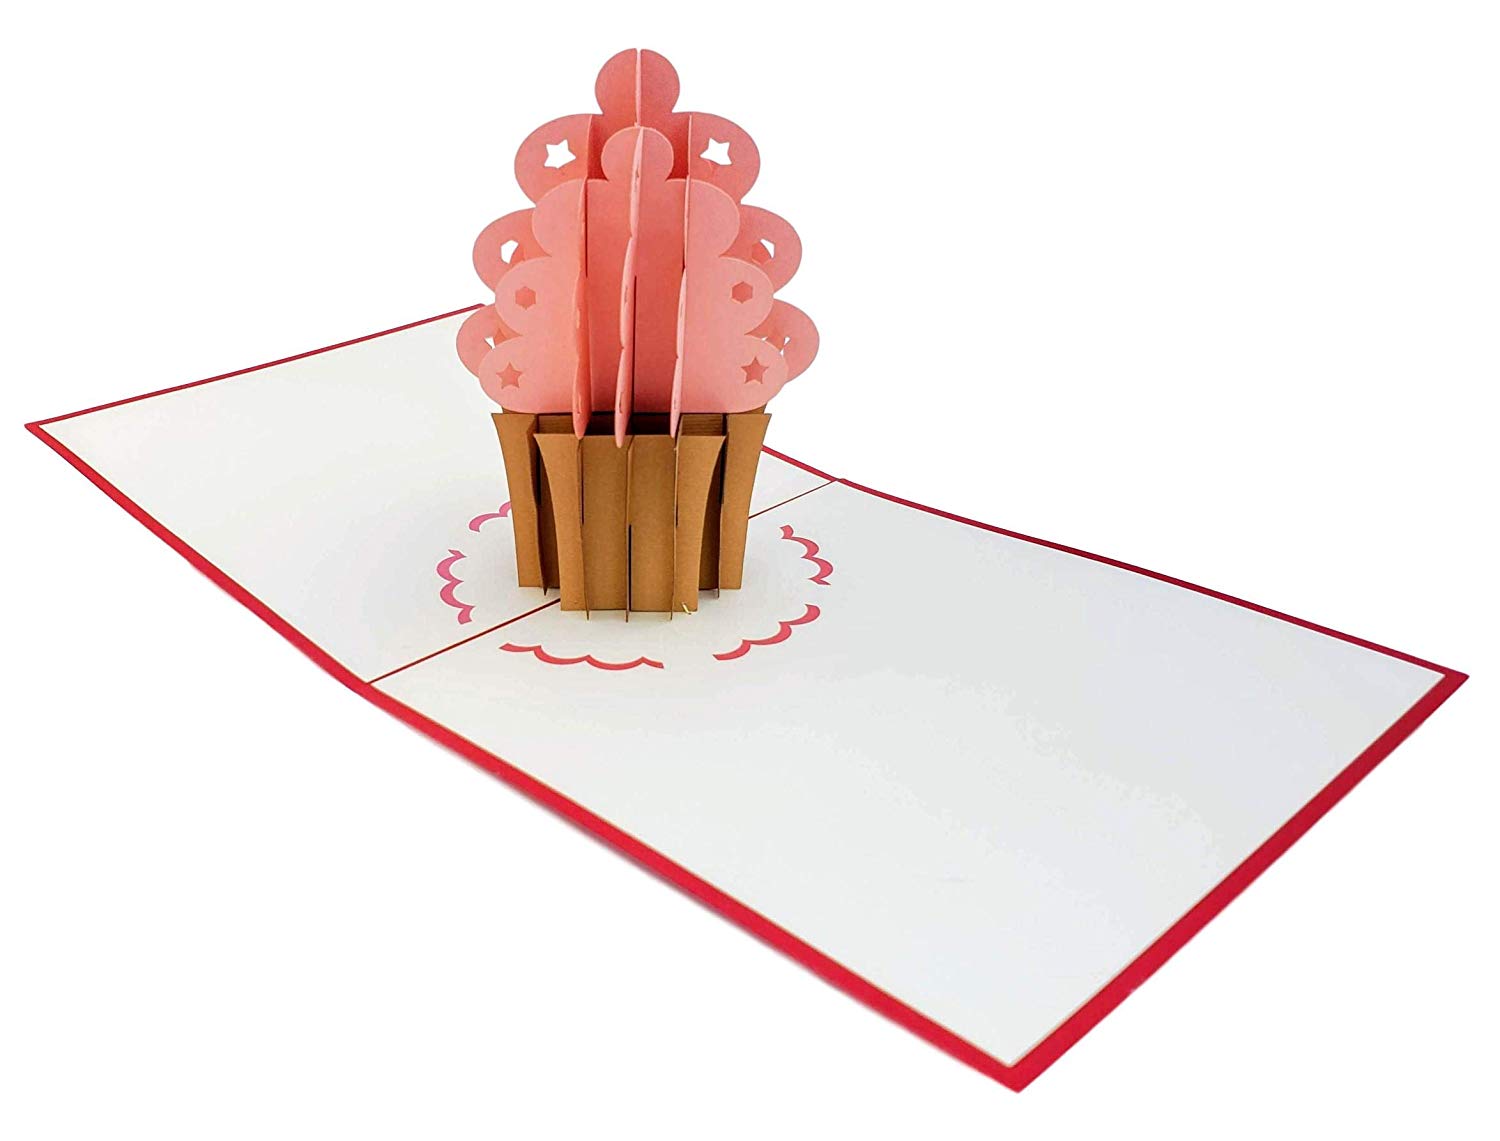 1st Pink Cupcake Birthday 3D Pop Up Greeting Card - Birthday - iGifts And Cards